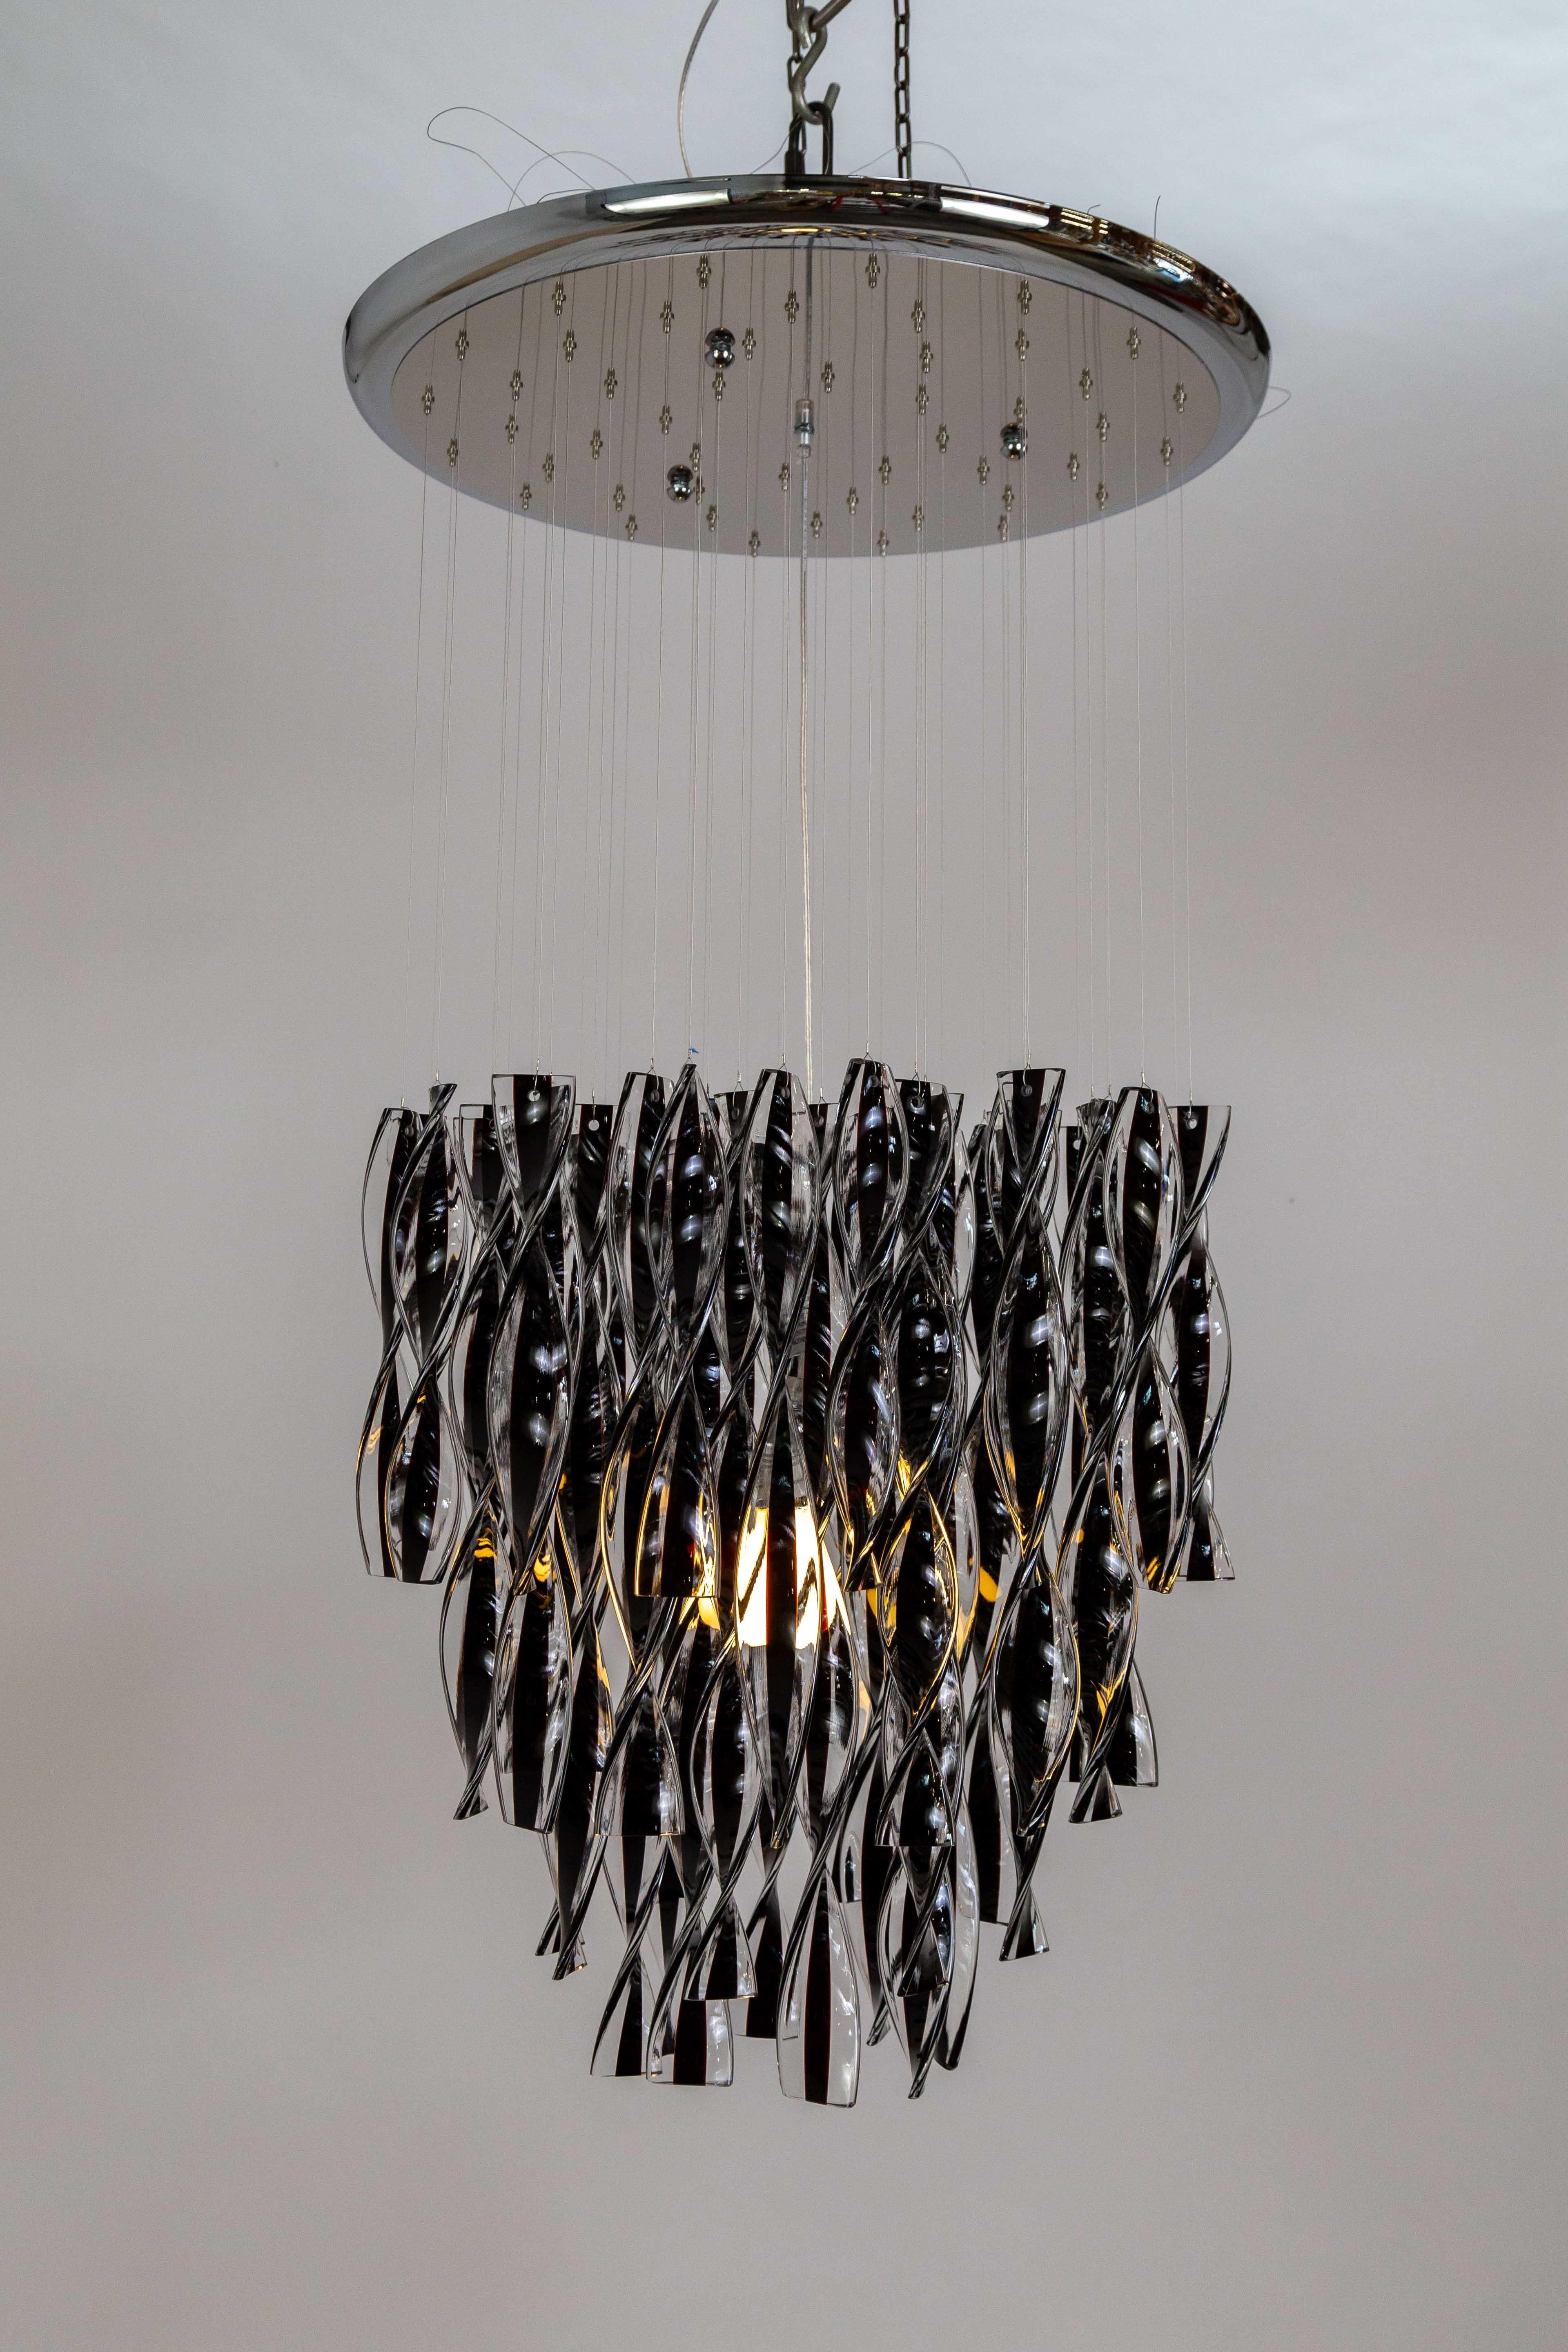 A waterfall pendant light of dangling black and clear glass ribbons reflect waves of light around it. A master glassmaker crafts the glass that composes a fluid and aquatic image with a diffused glow. The ribbons hang individually from a circular,